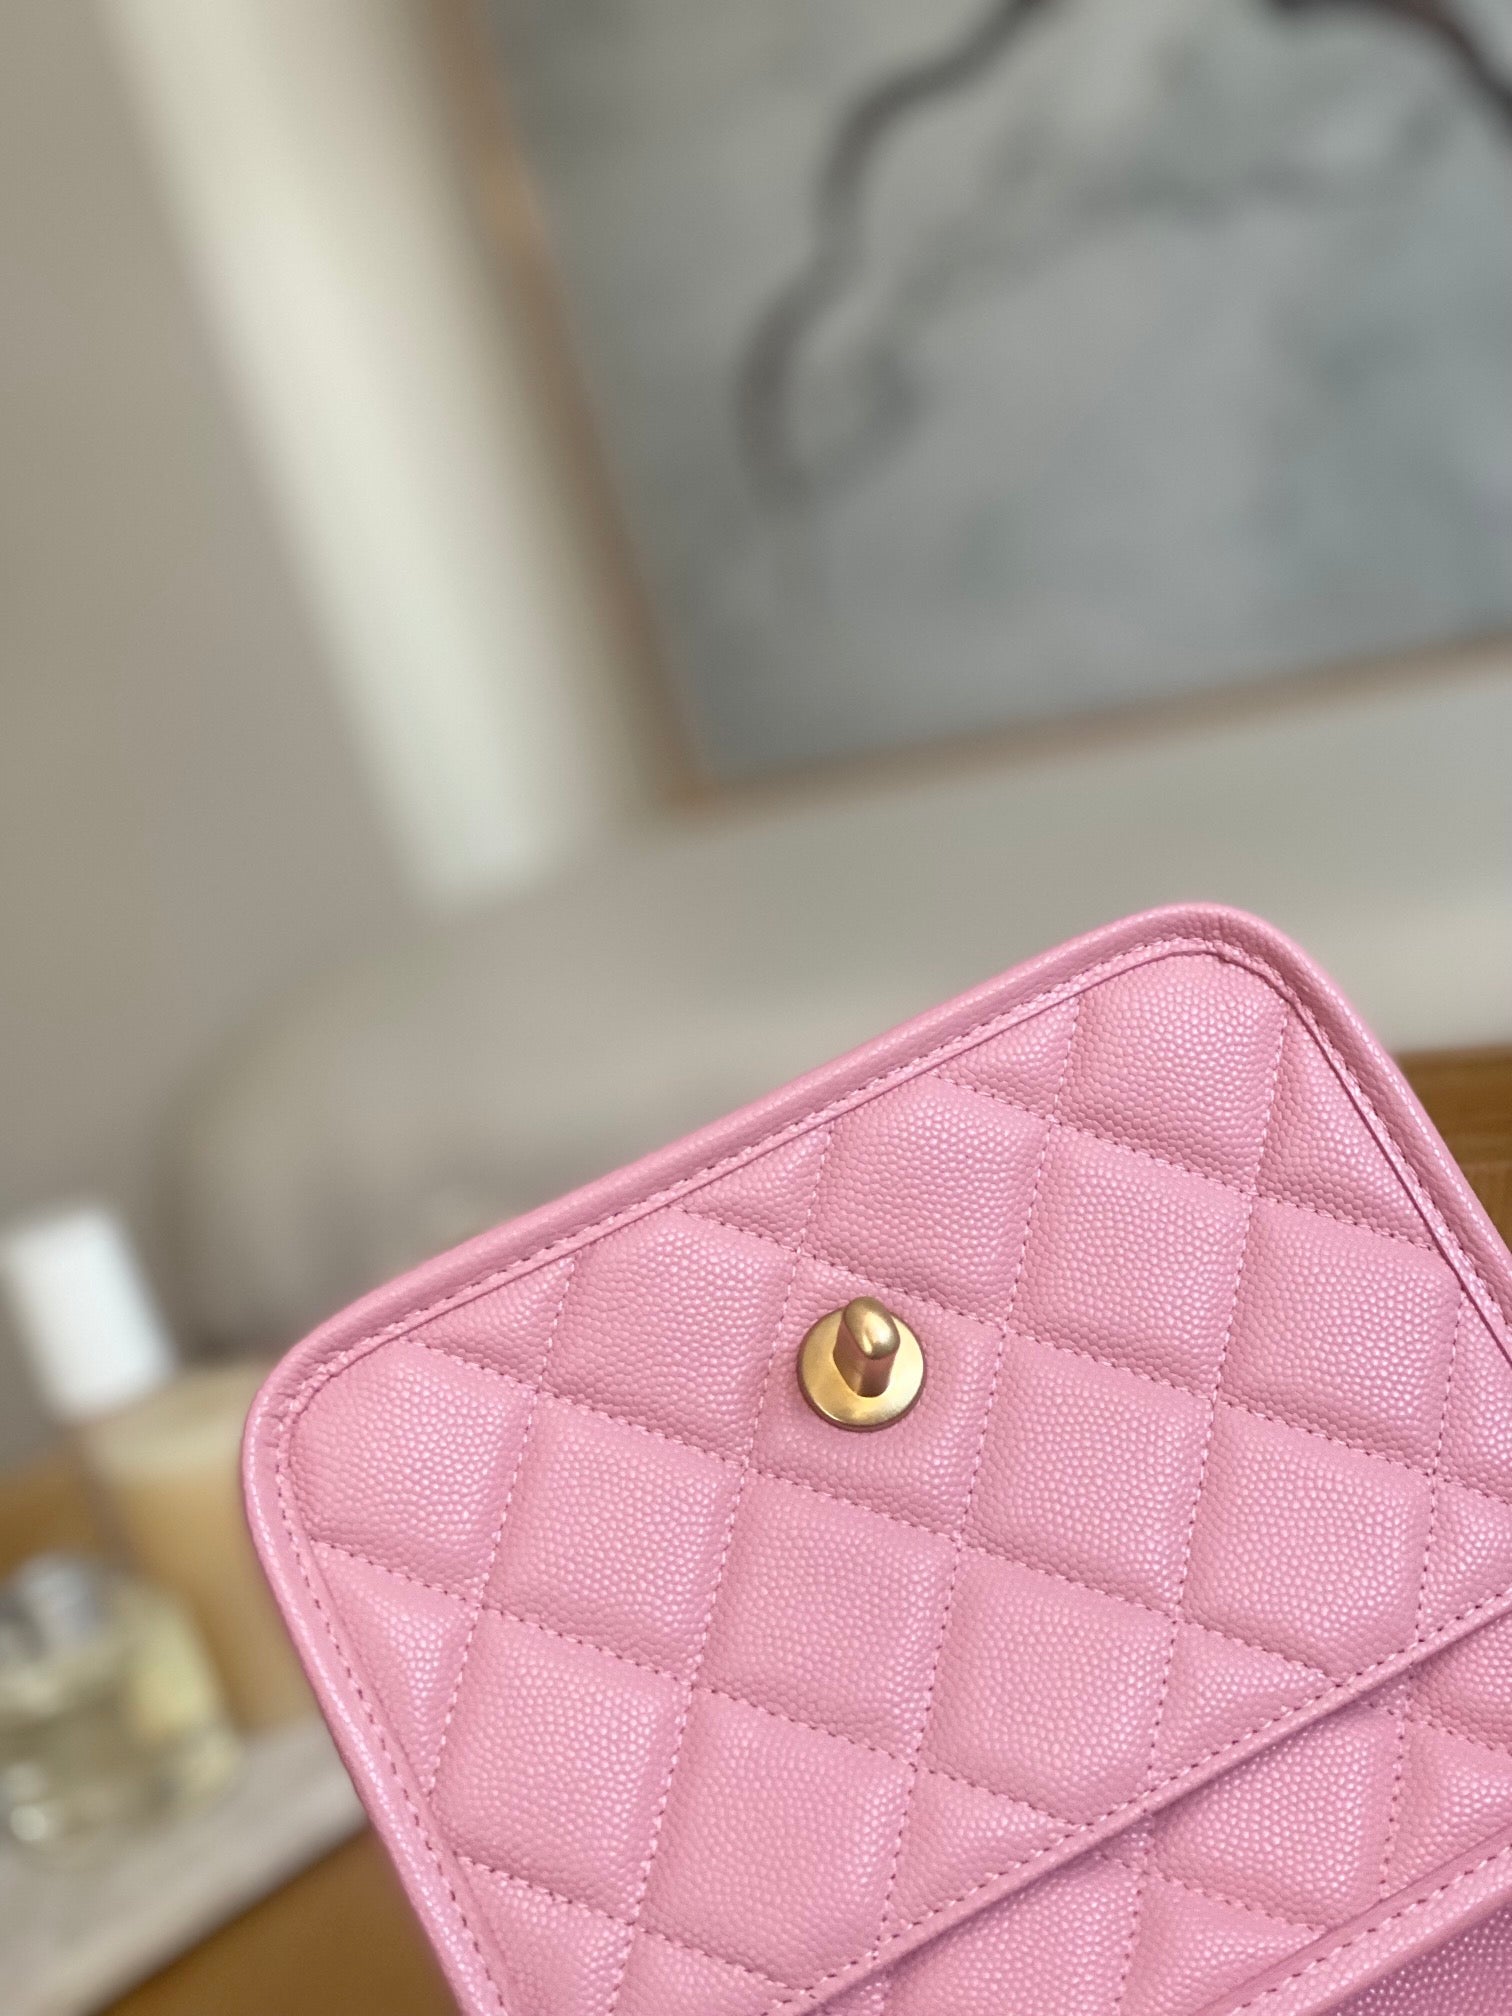 chanel-as3652-small-flap-bag-with-top-handle-calfskin-gold-tone-metal-pink-007-luxibags.ru